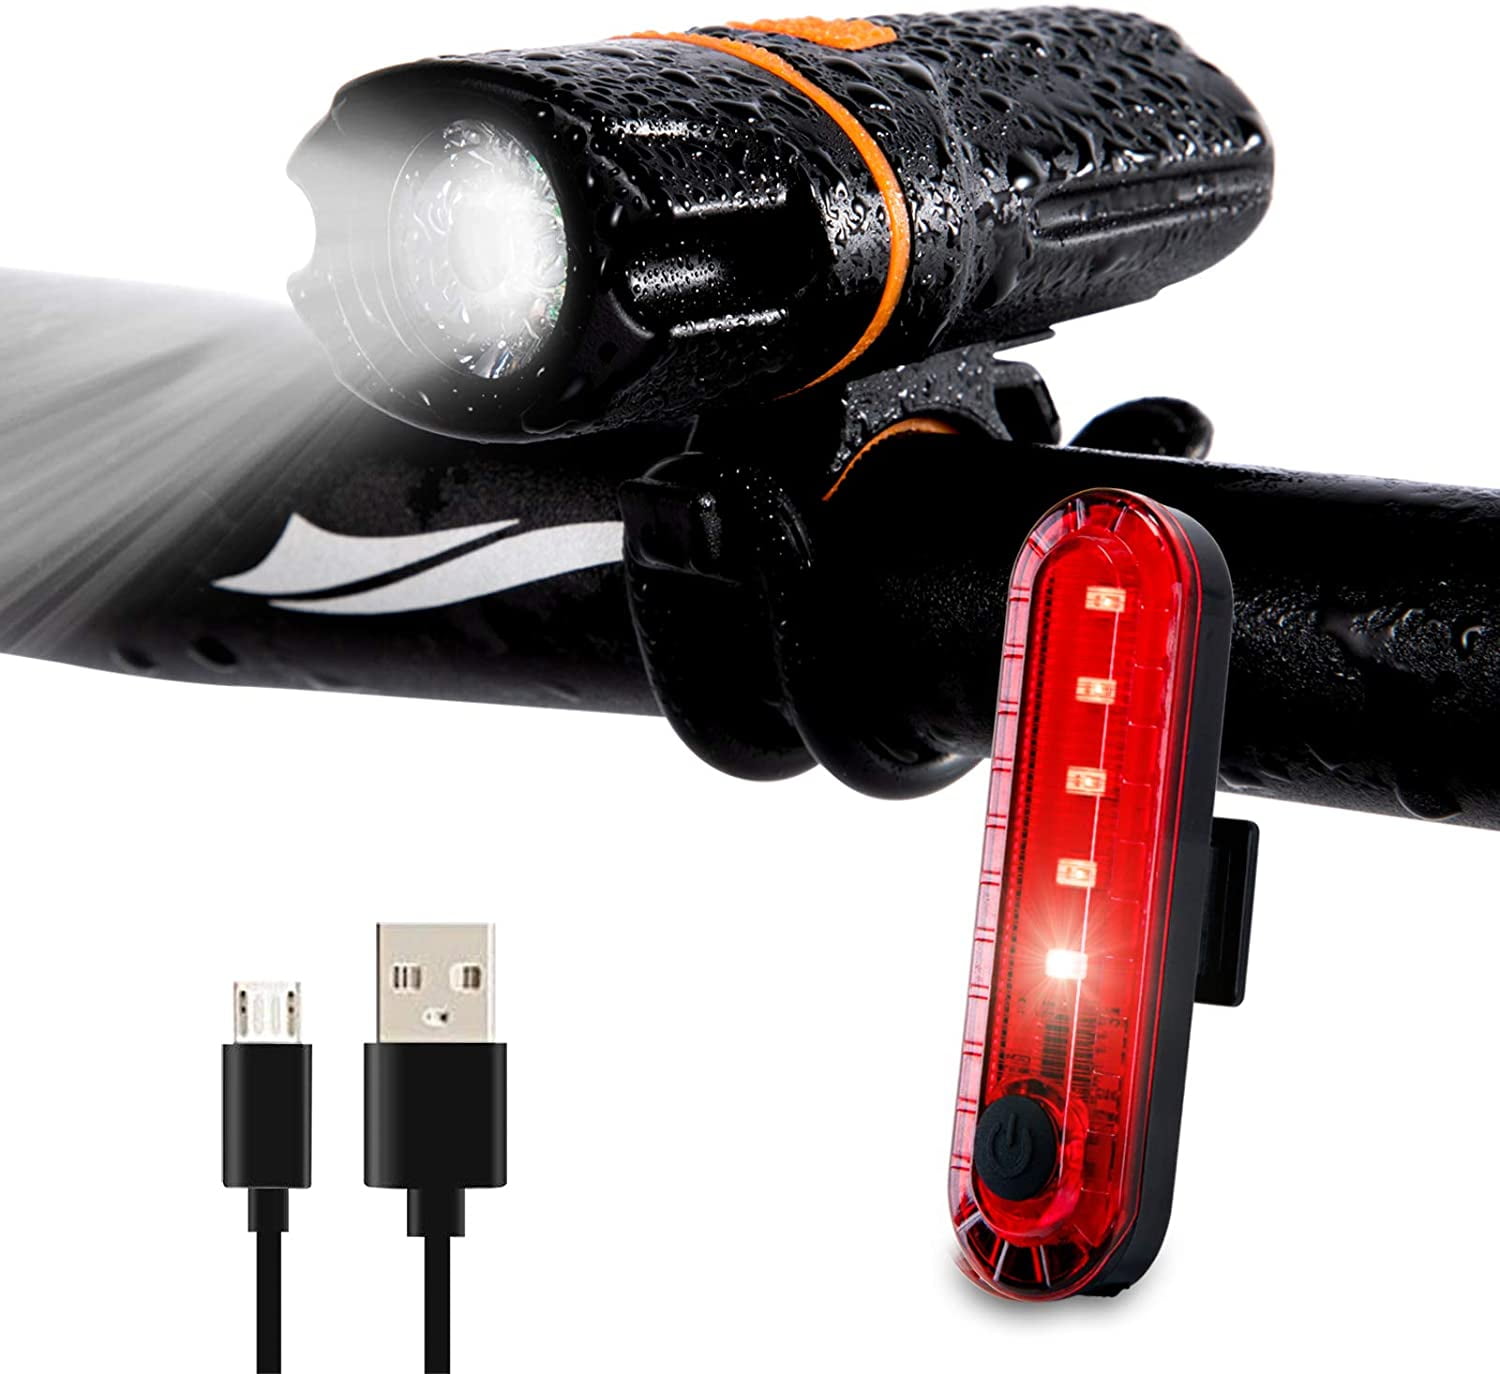 Mini Torch Ultra Bright Front LED USB Rechargeable Bike Bicycle Light Lamp Torch 